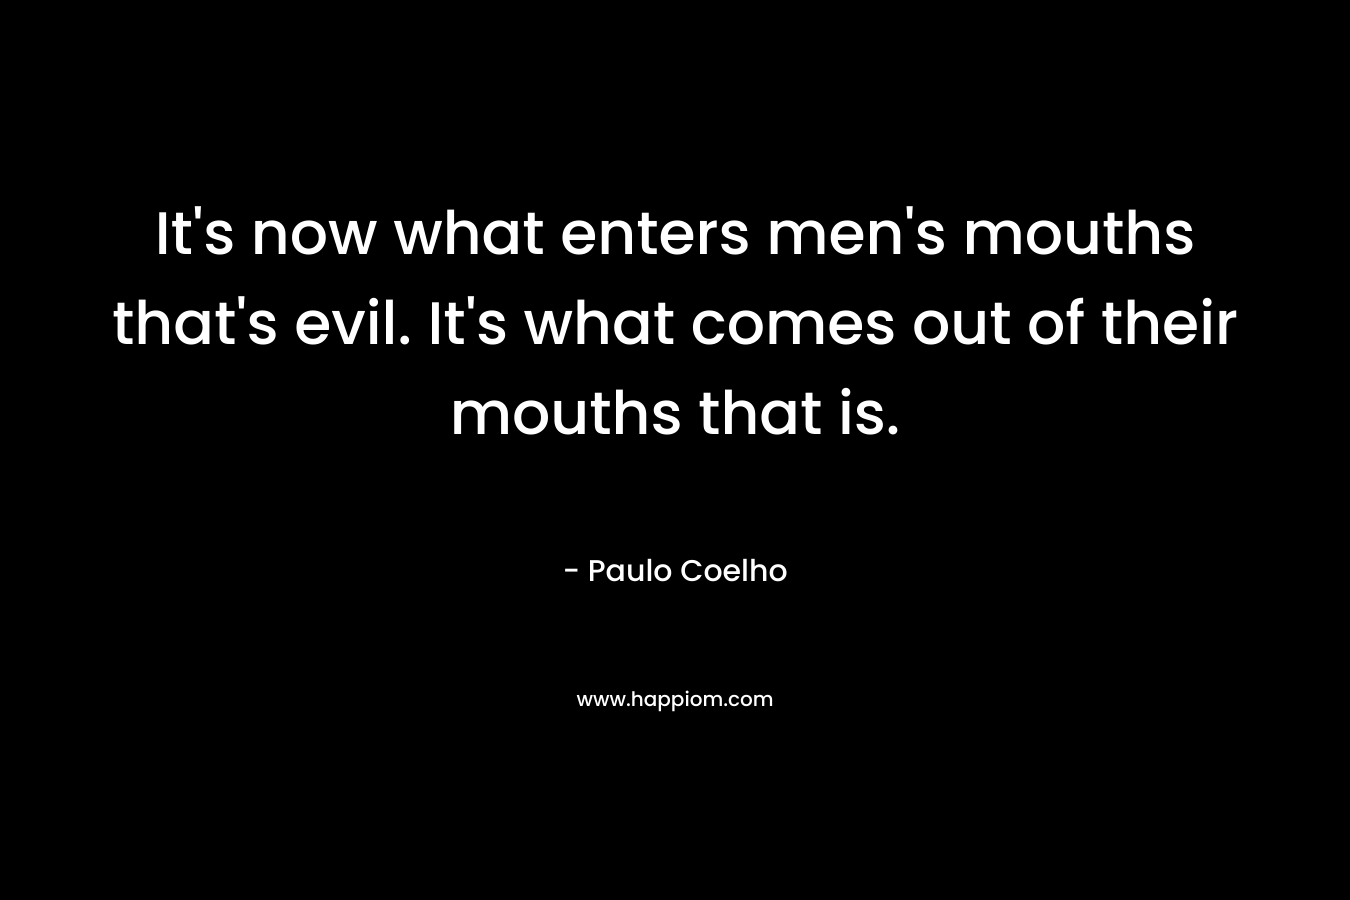 It's now what enters men's mouths that's evil. It's what comes out of their mouths that is.